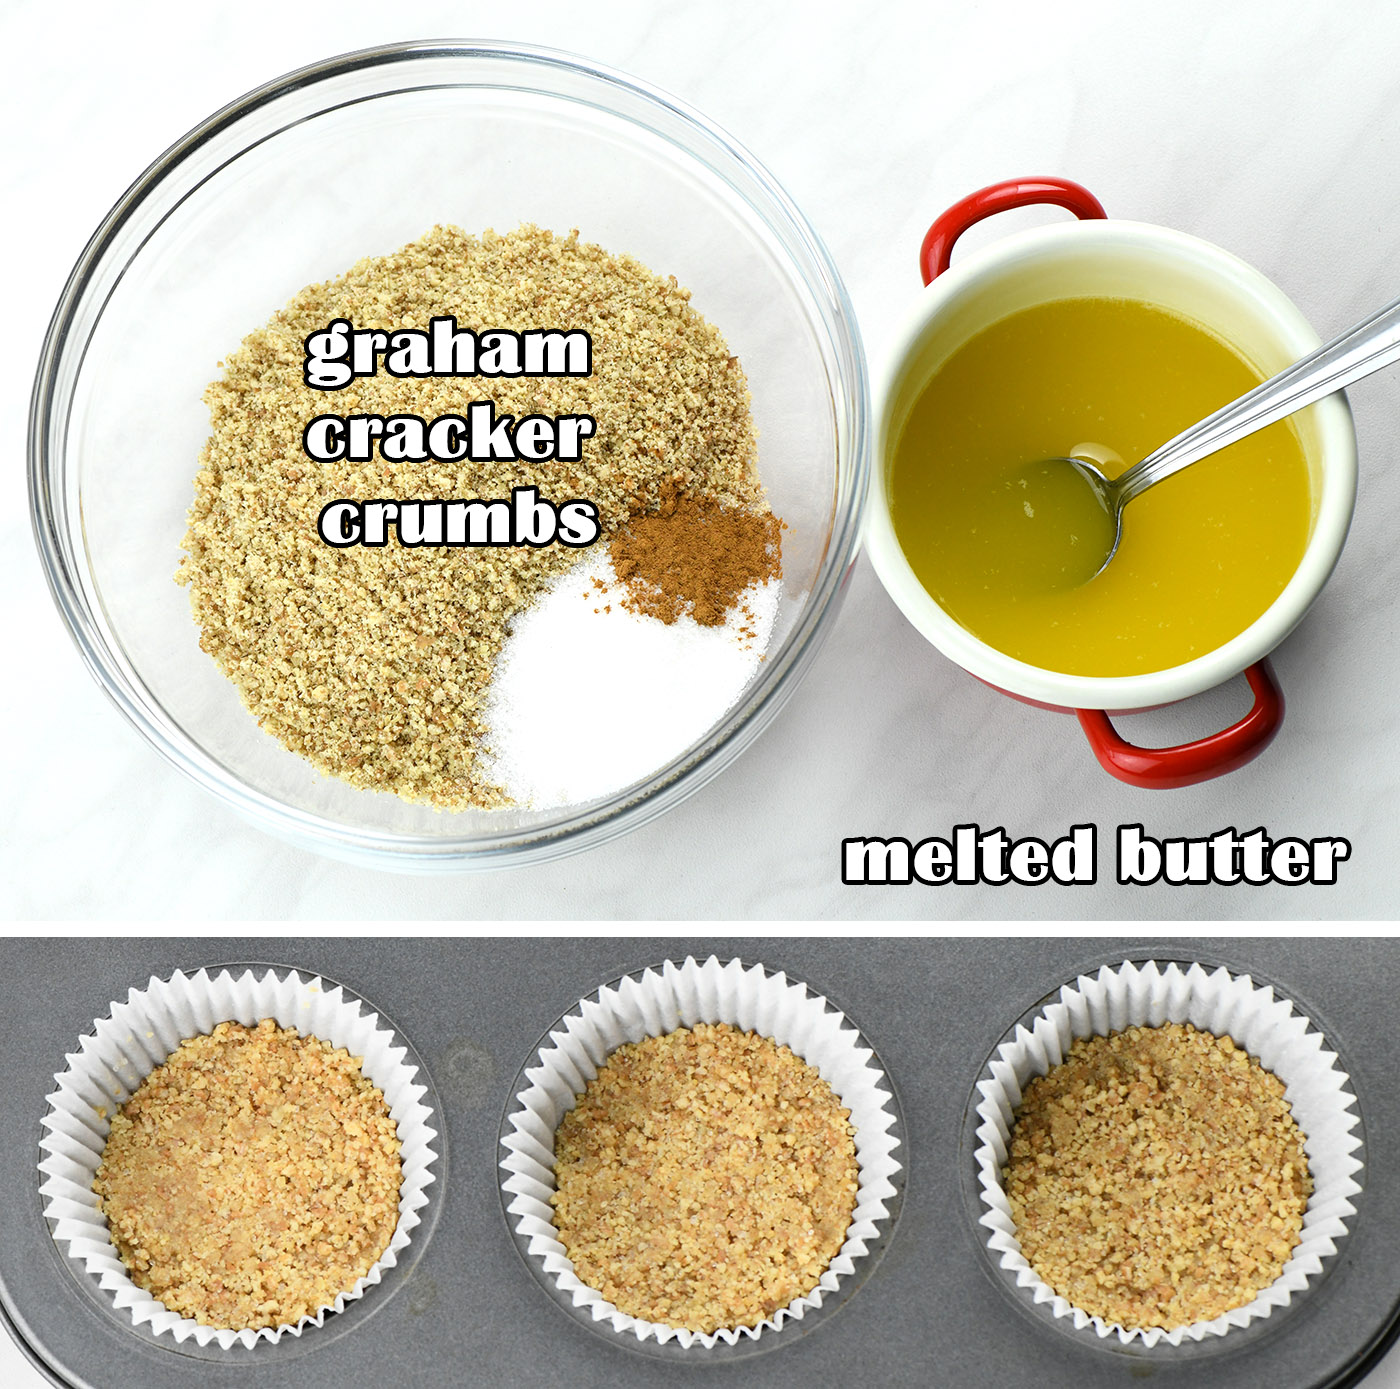 The image is part of a series showing the process of preparing a graham cracker crust for desserts such as cheesecakes or pies. On the top left, there's a clear glass bowl with graham cracker crumbs mixed with what appears to be sugar and a hint of cinnamon. On the top right, a pot contains melted butter with a spoon, ready to be mixed with the dry ingredients. The bottom of the image shows two muffin liners in a tin, each filled with the graham cracker mixture, which is likely pressed down to form the base layer of a mini cheesecake or similar dessert. 